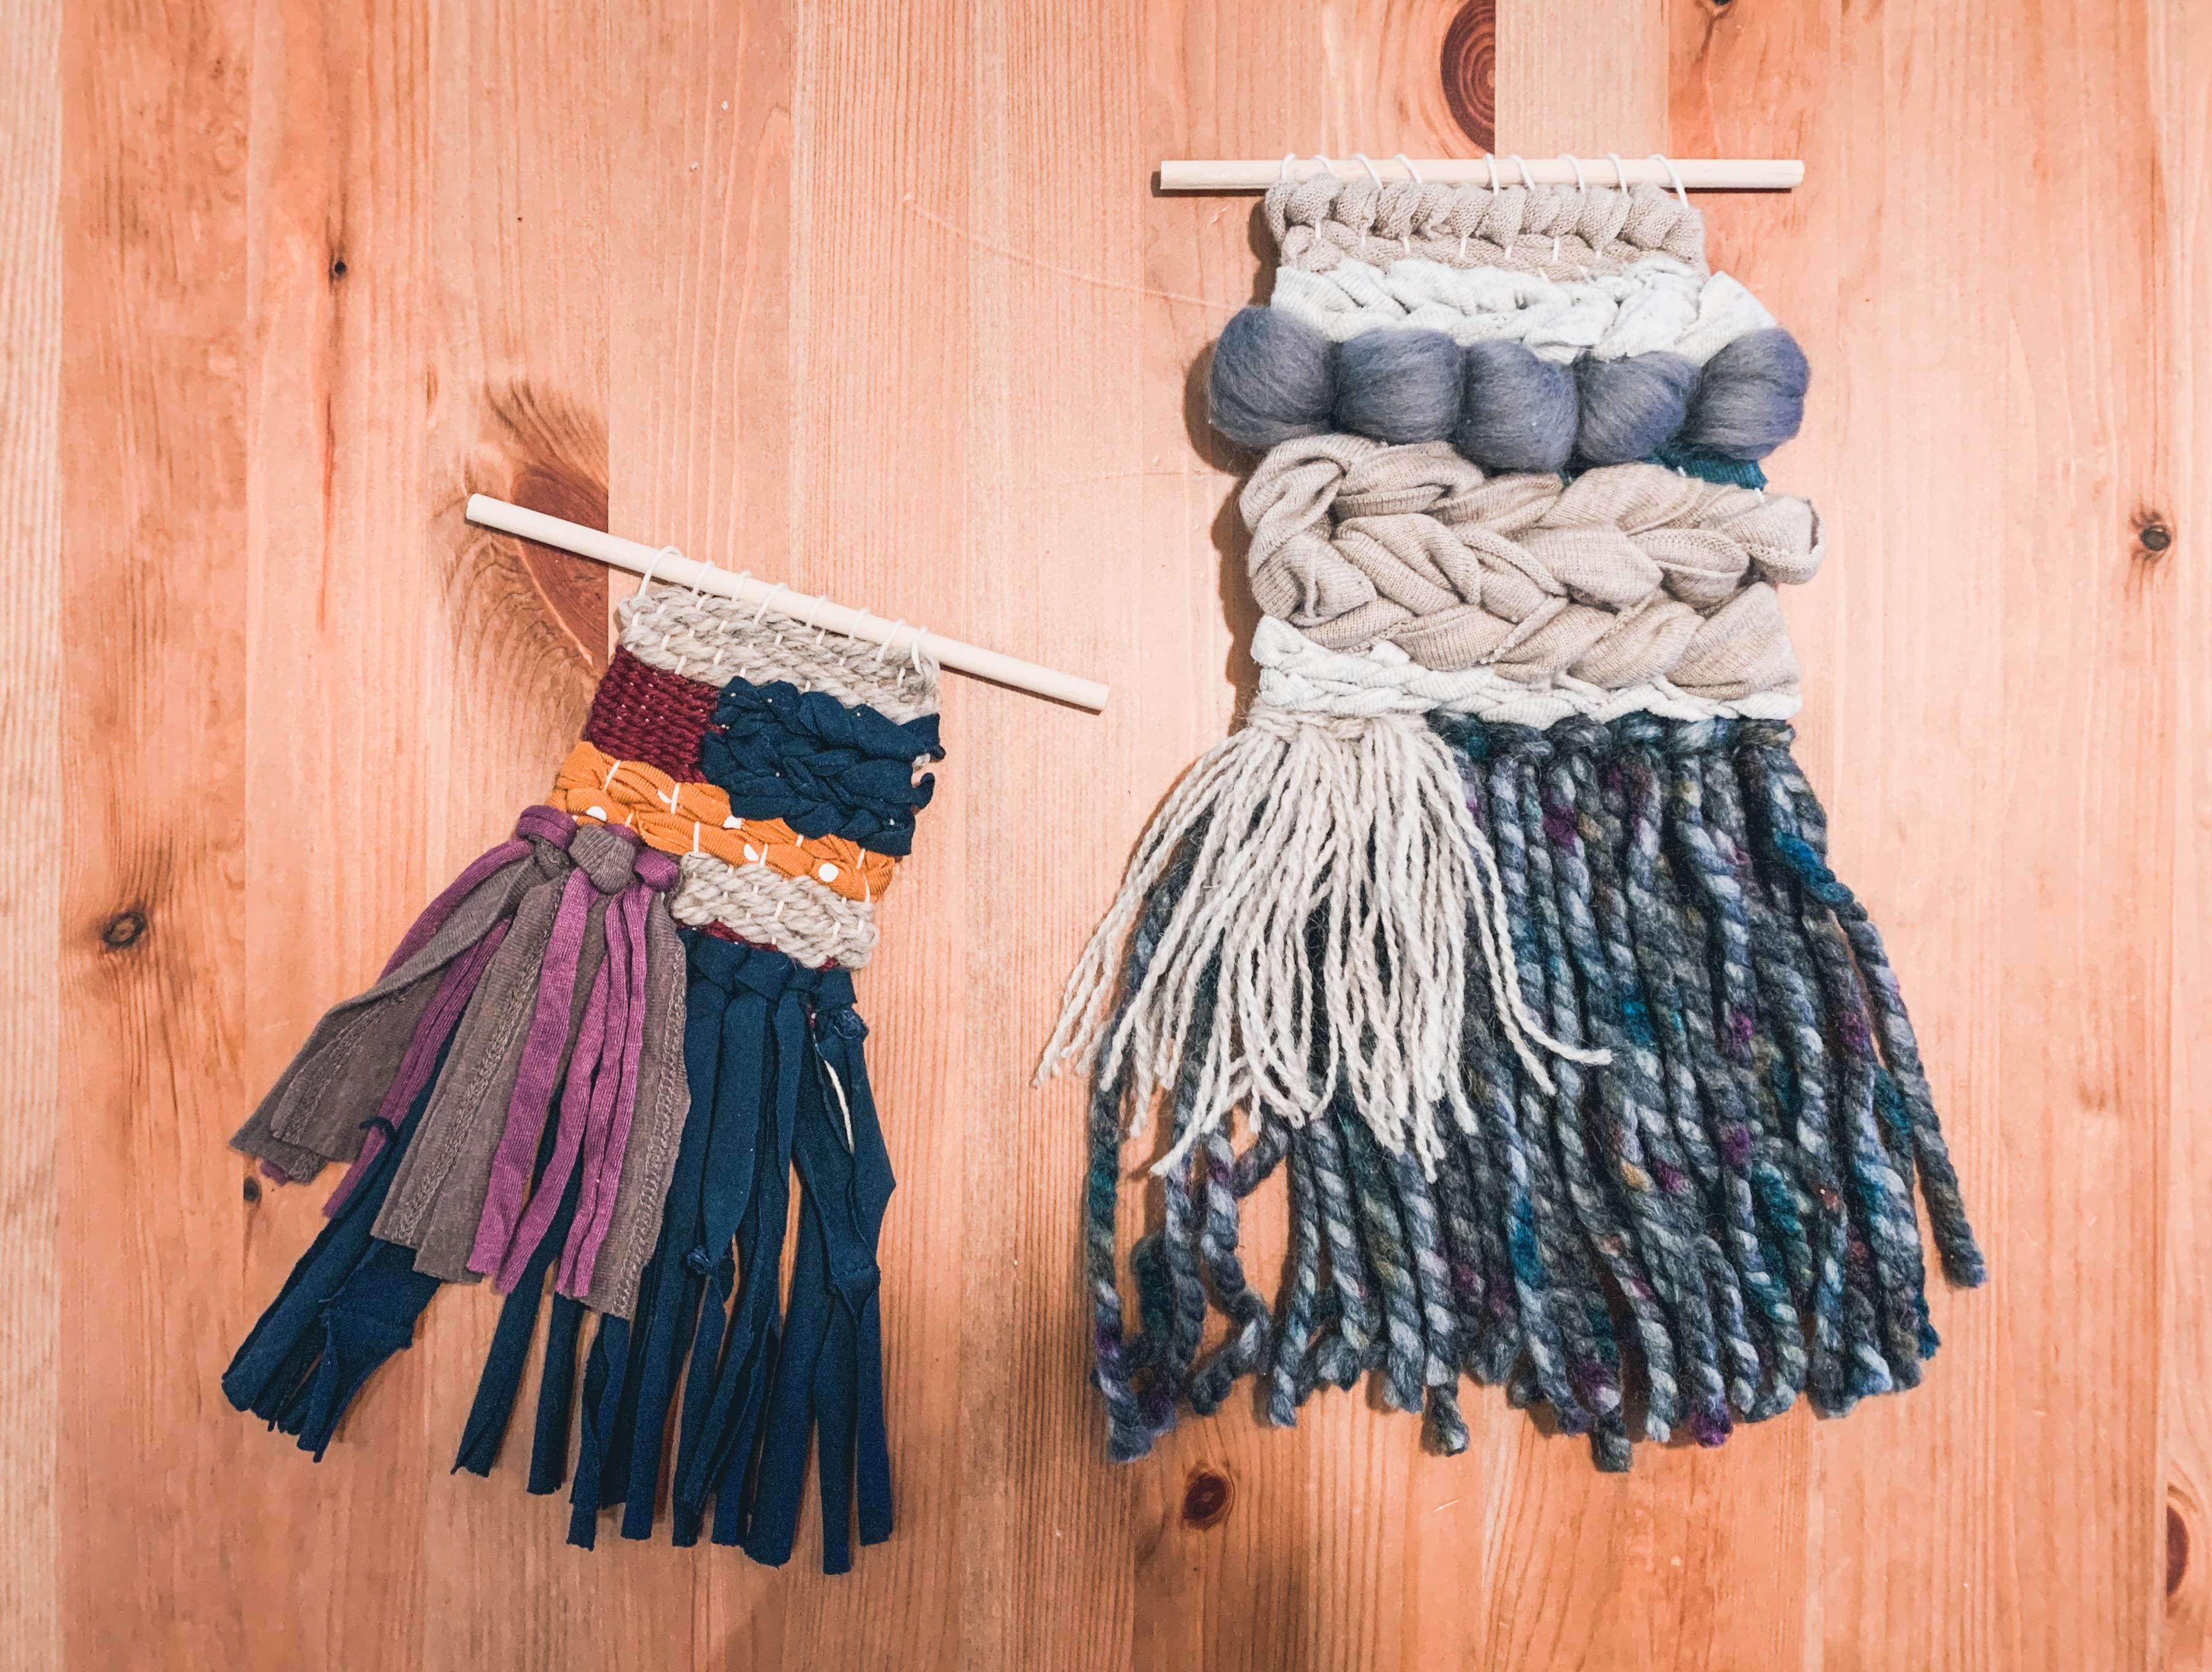 The Upcycle Project- Creative Loom Weaving